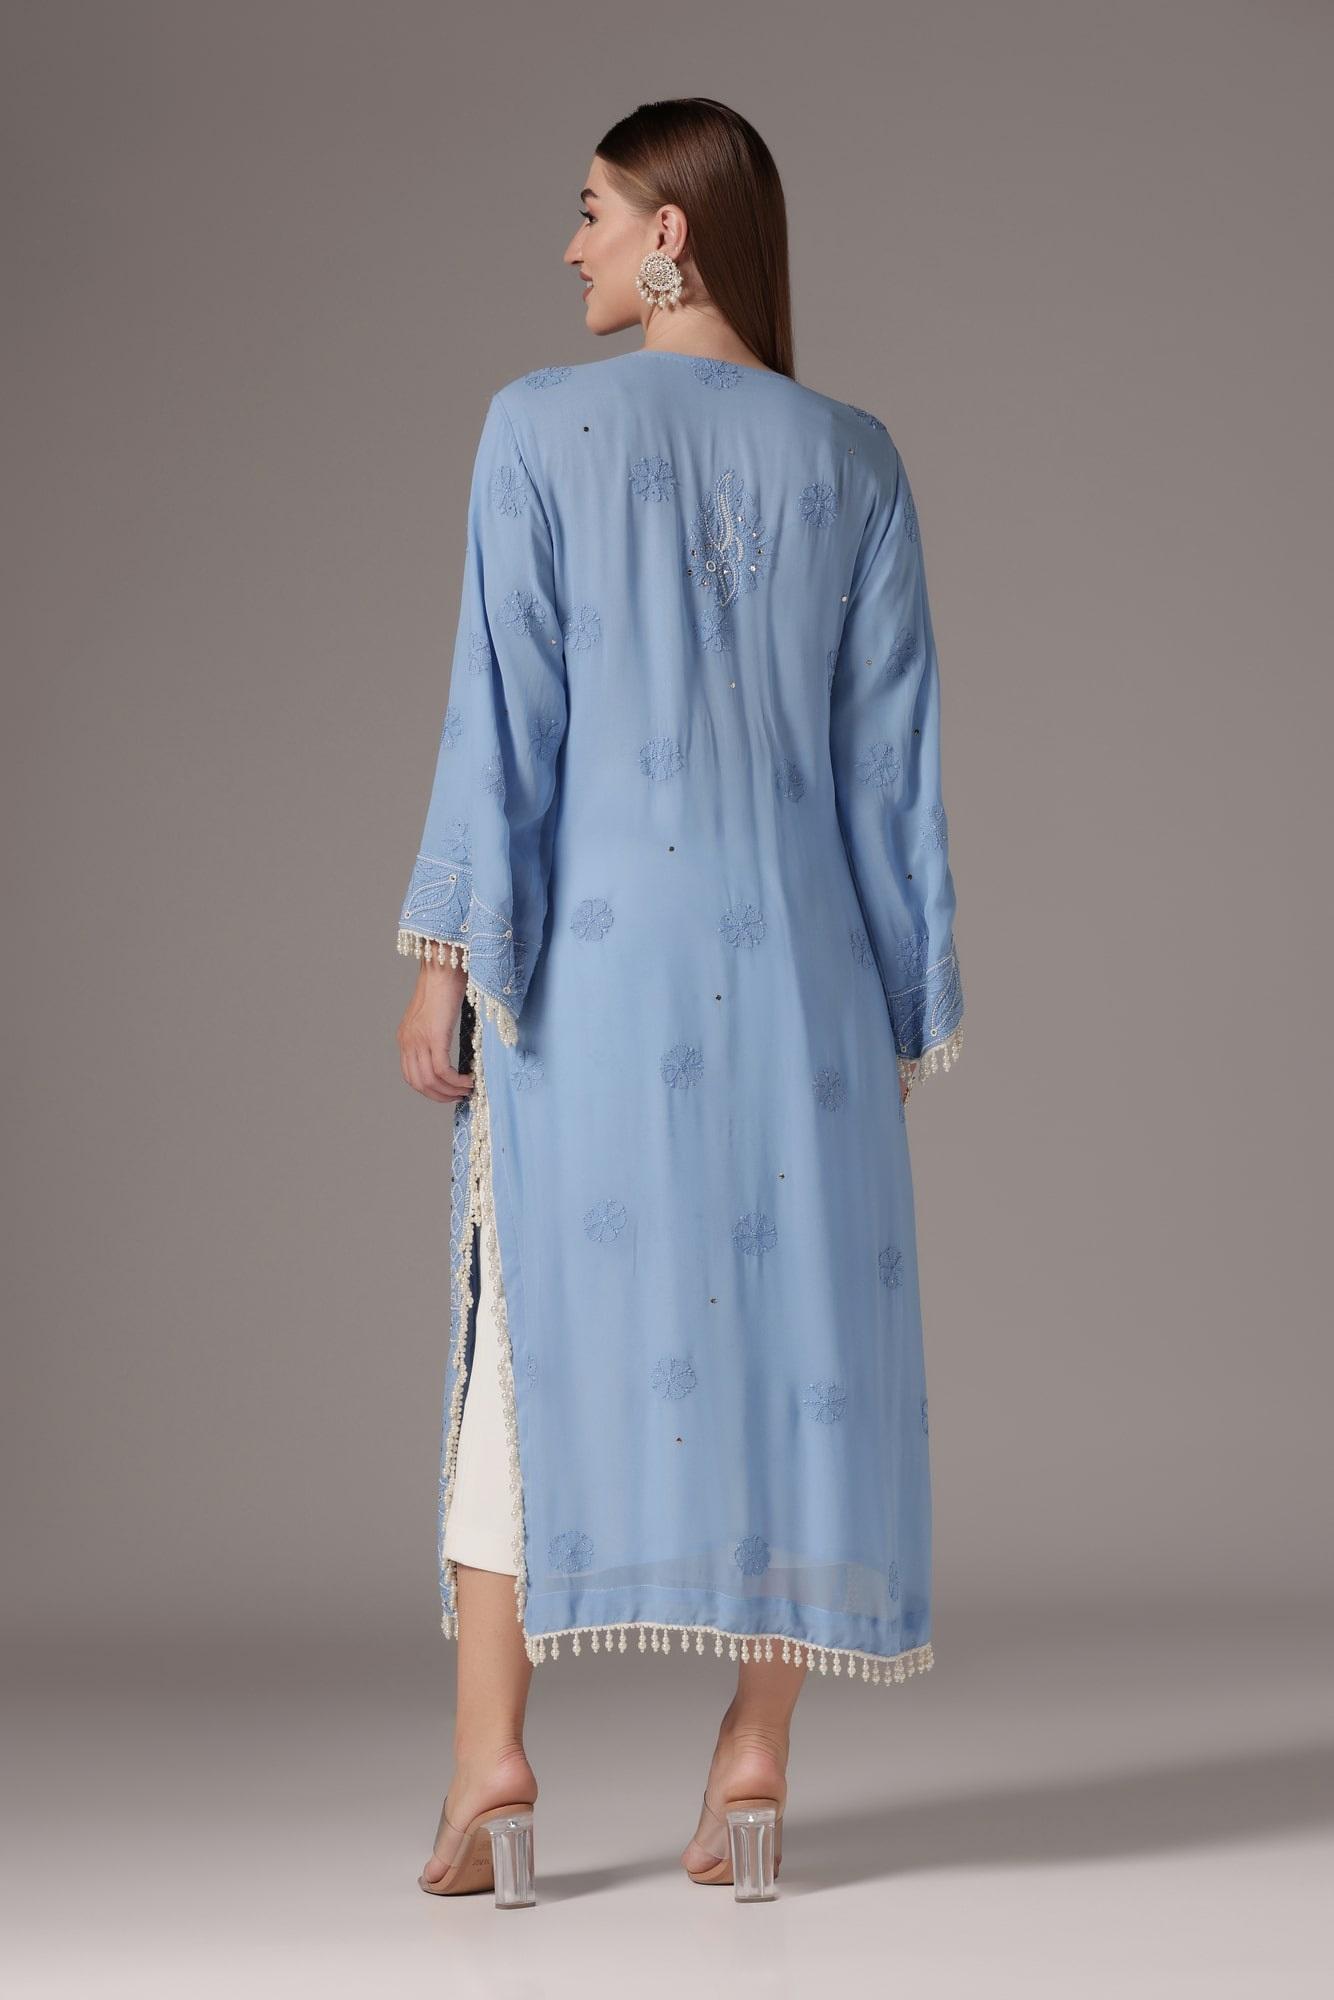 Blue Heavy Embroidered Chikan Suit With Dupatta